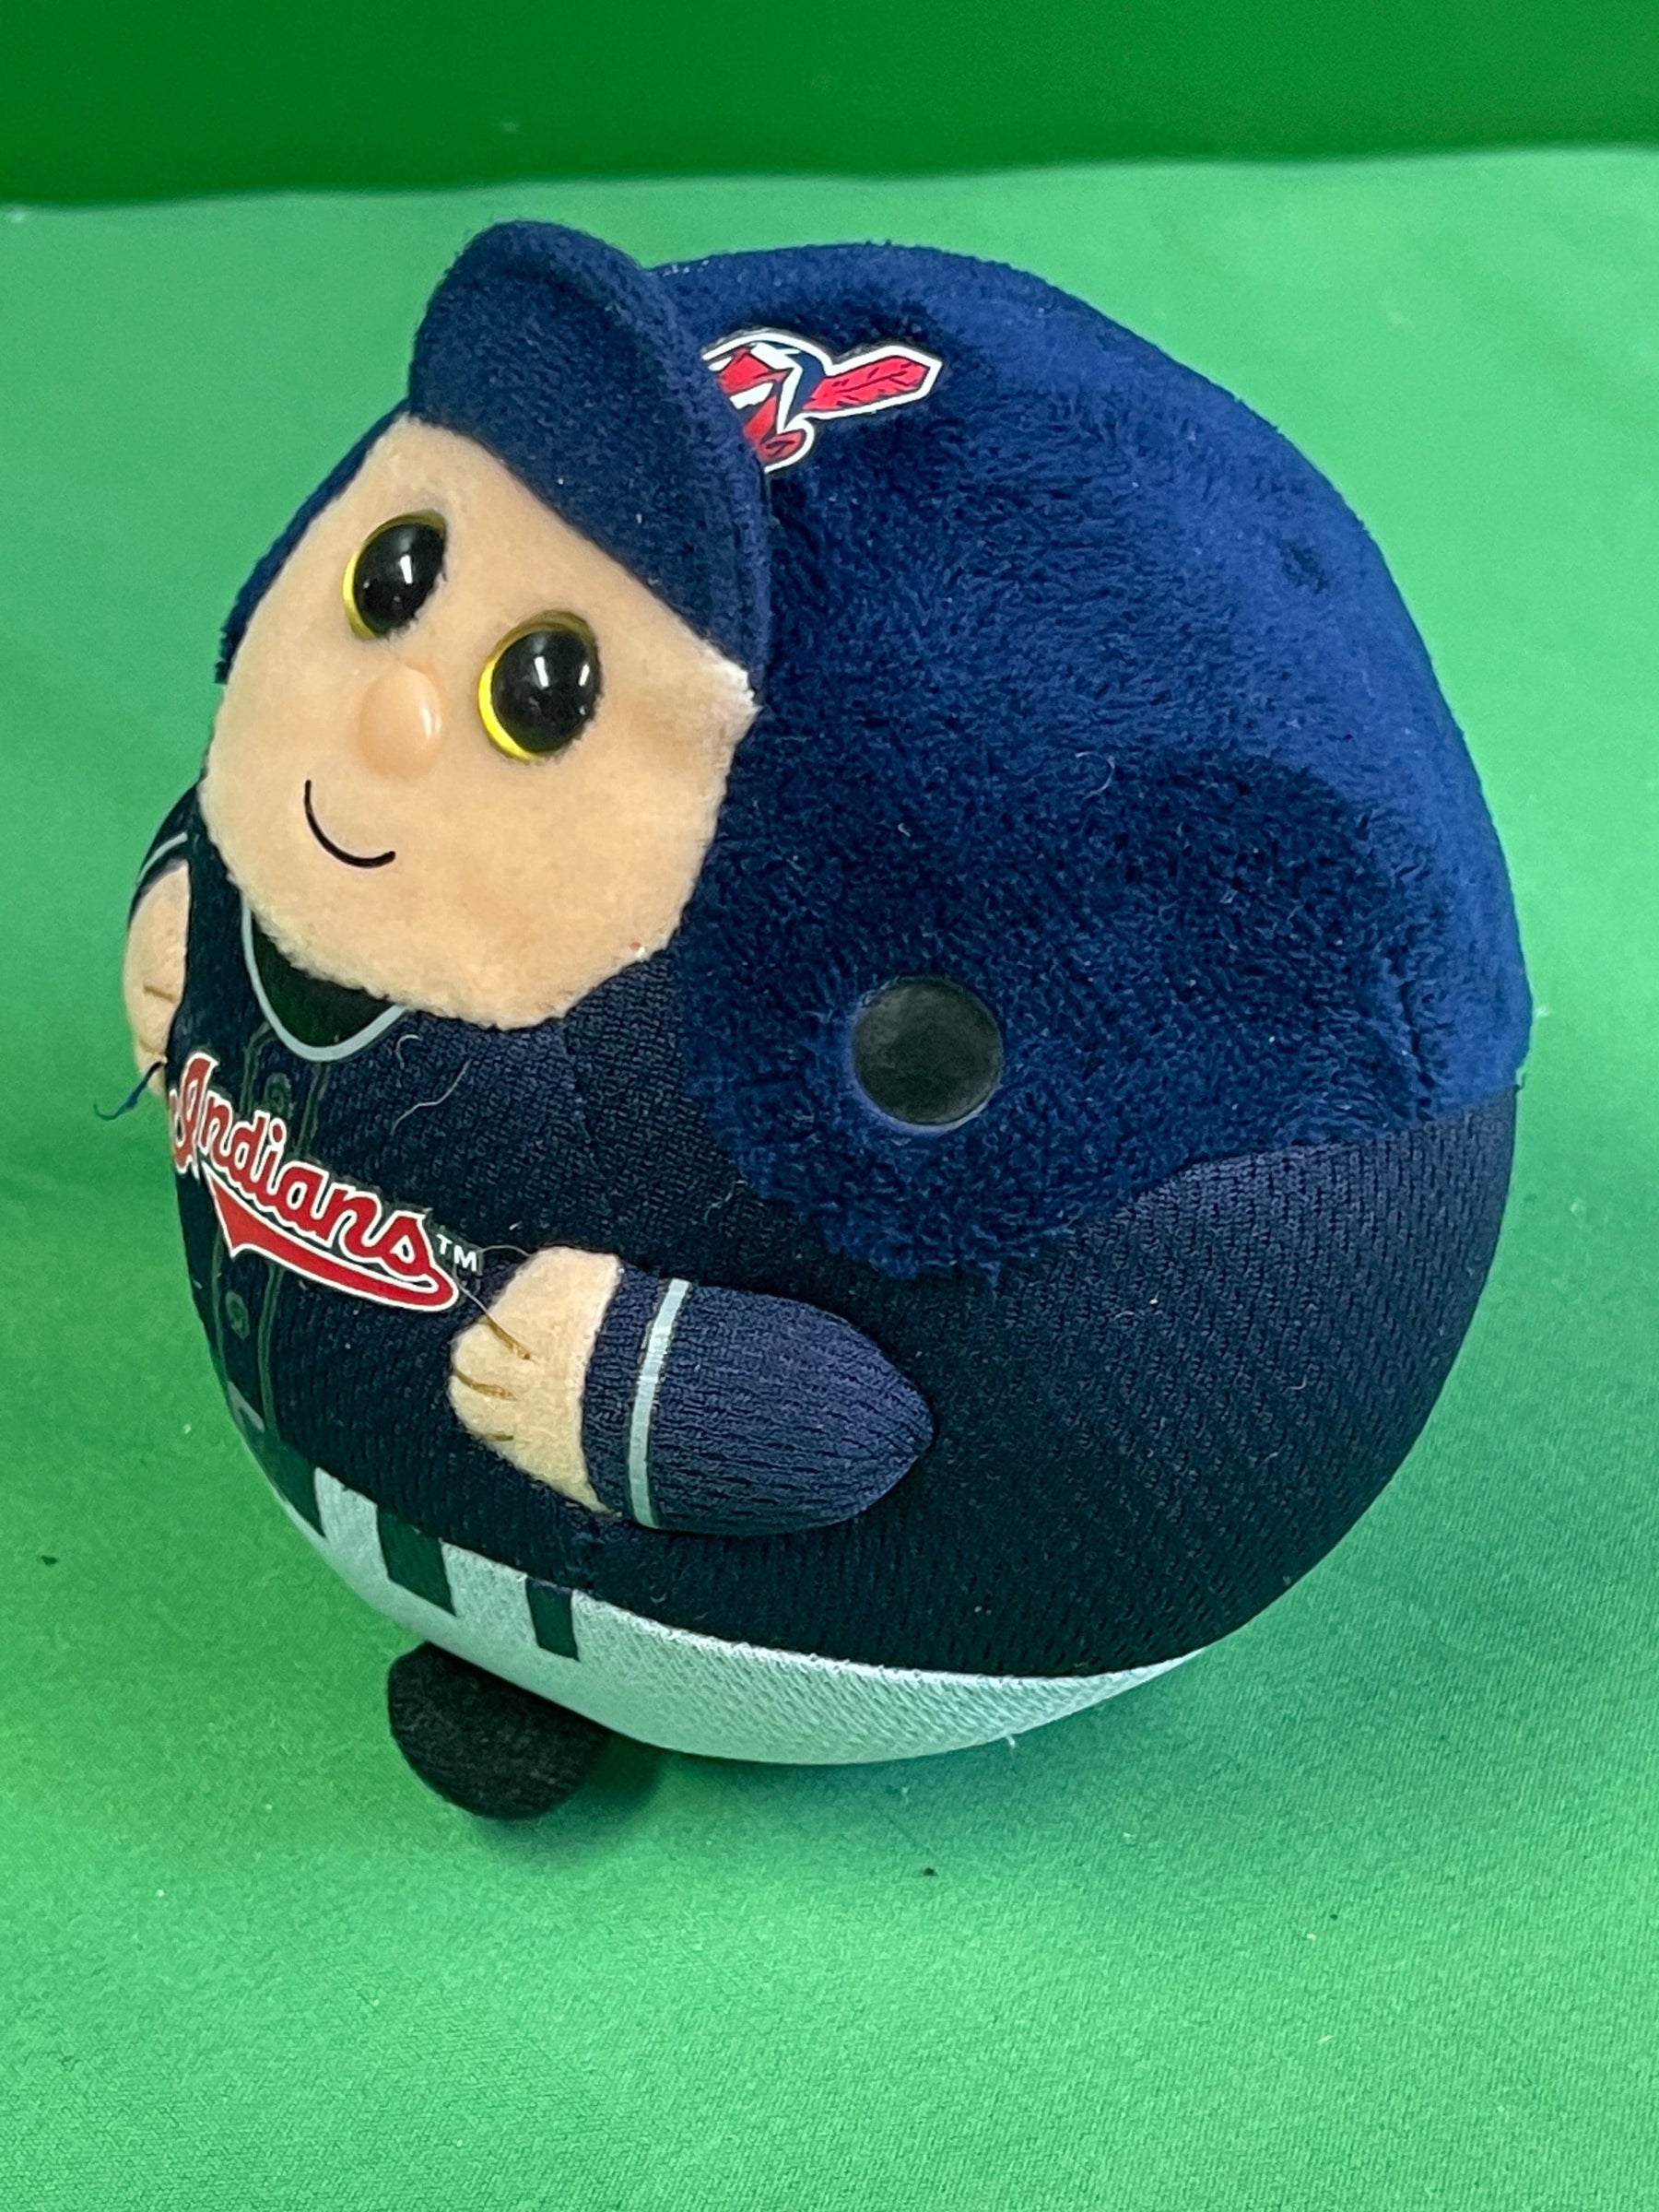 MLB Cleveland Guardians (Indians) Ty Ball Cuddly Toy 5"